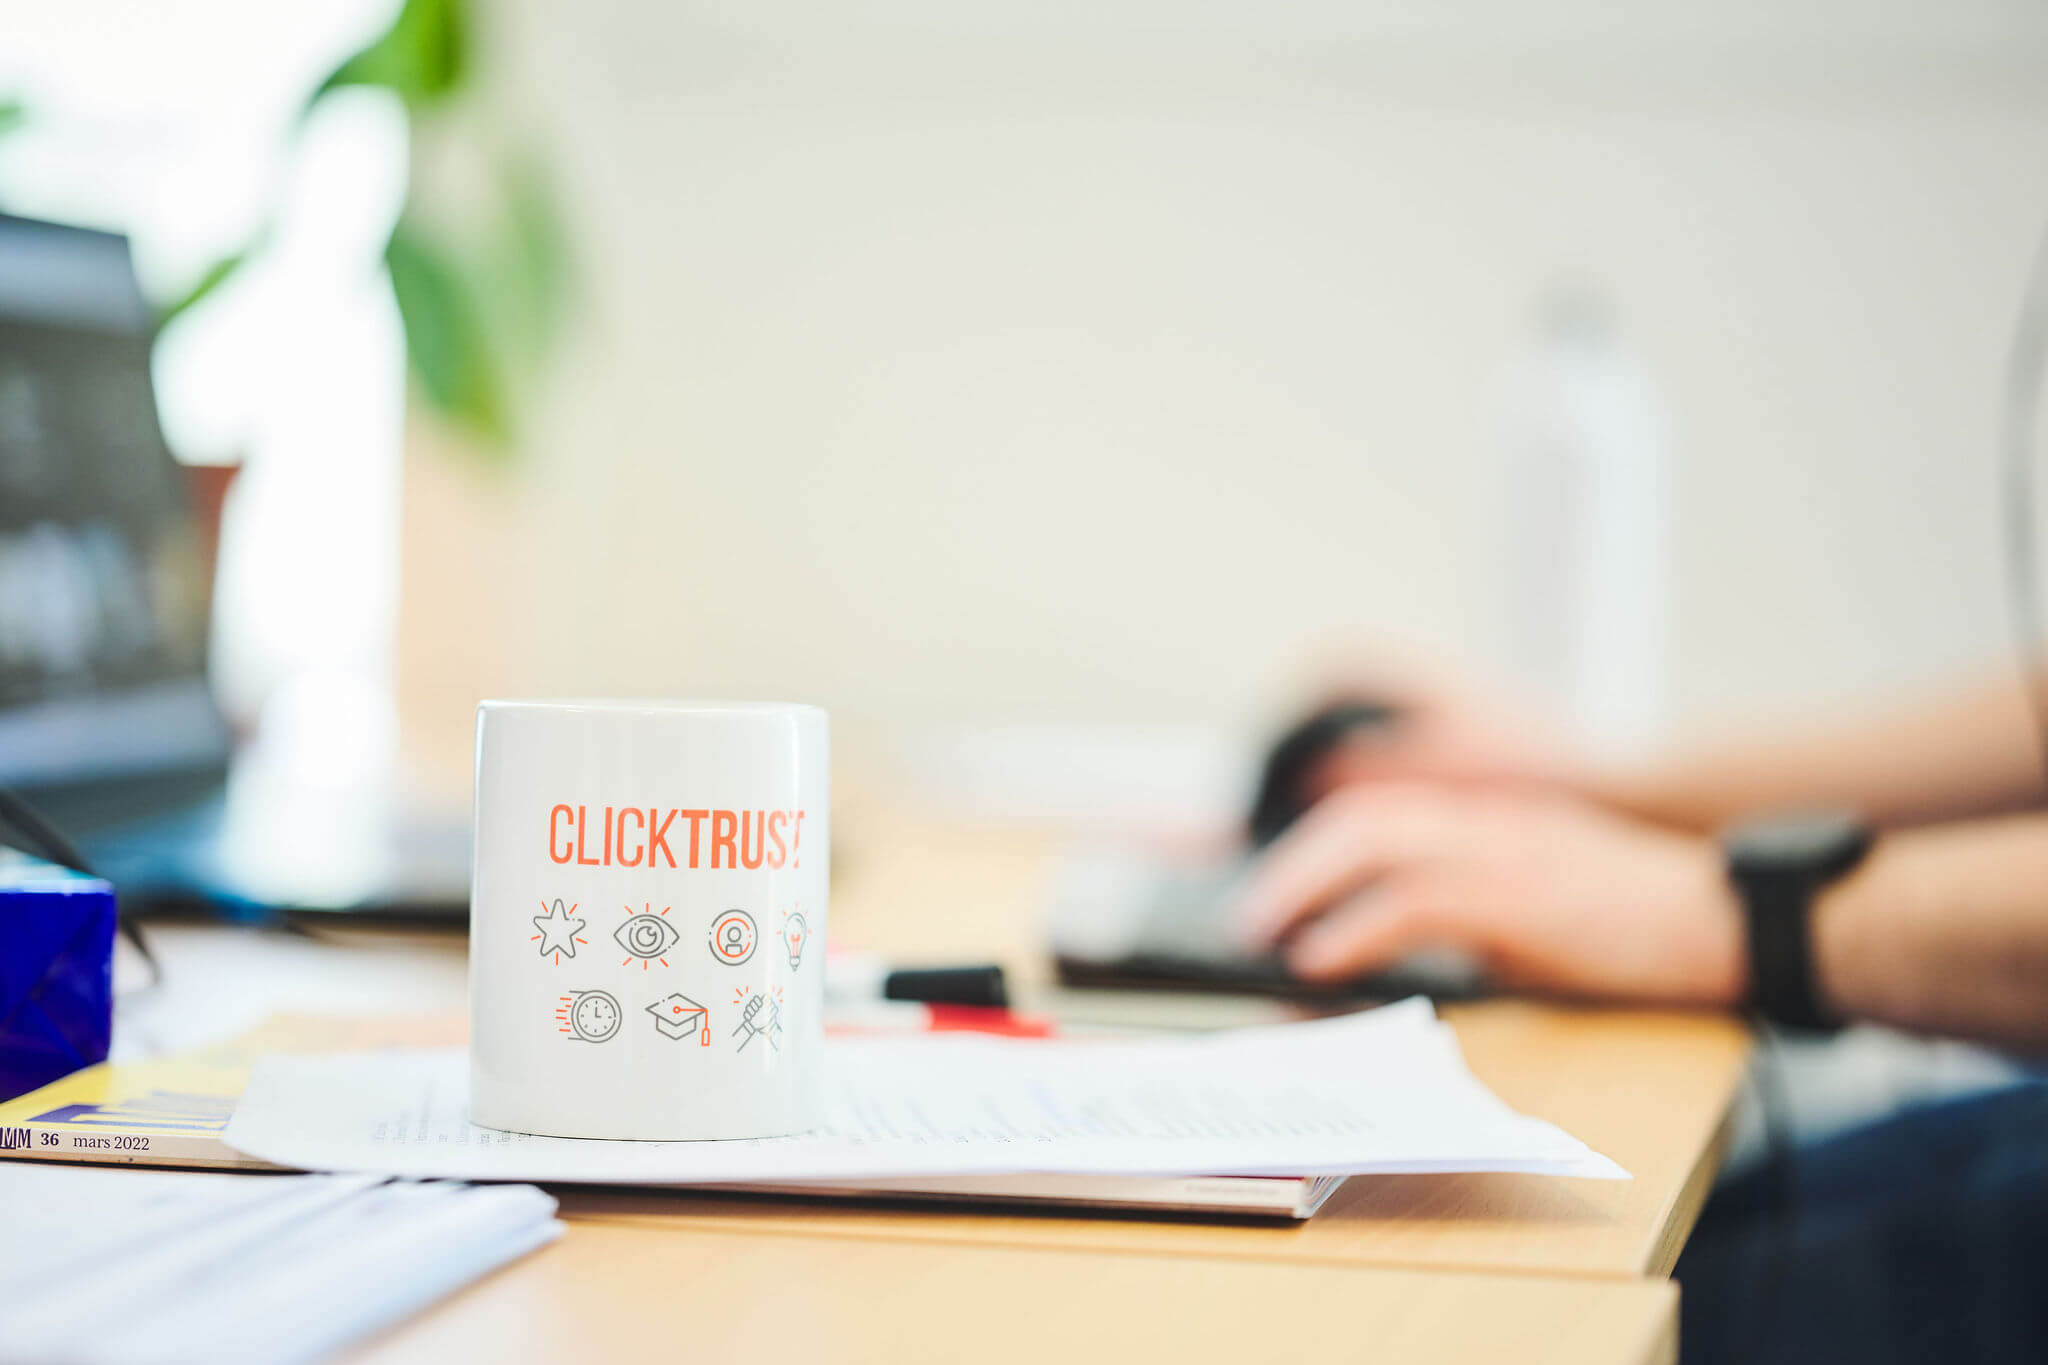 The CLICKTRUST monthly pick – September 2020